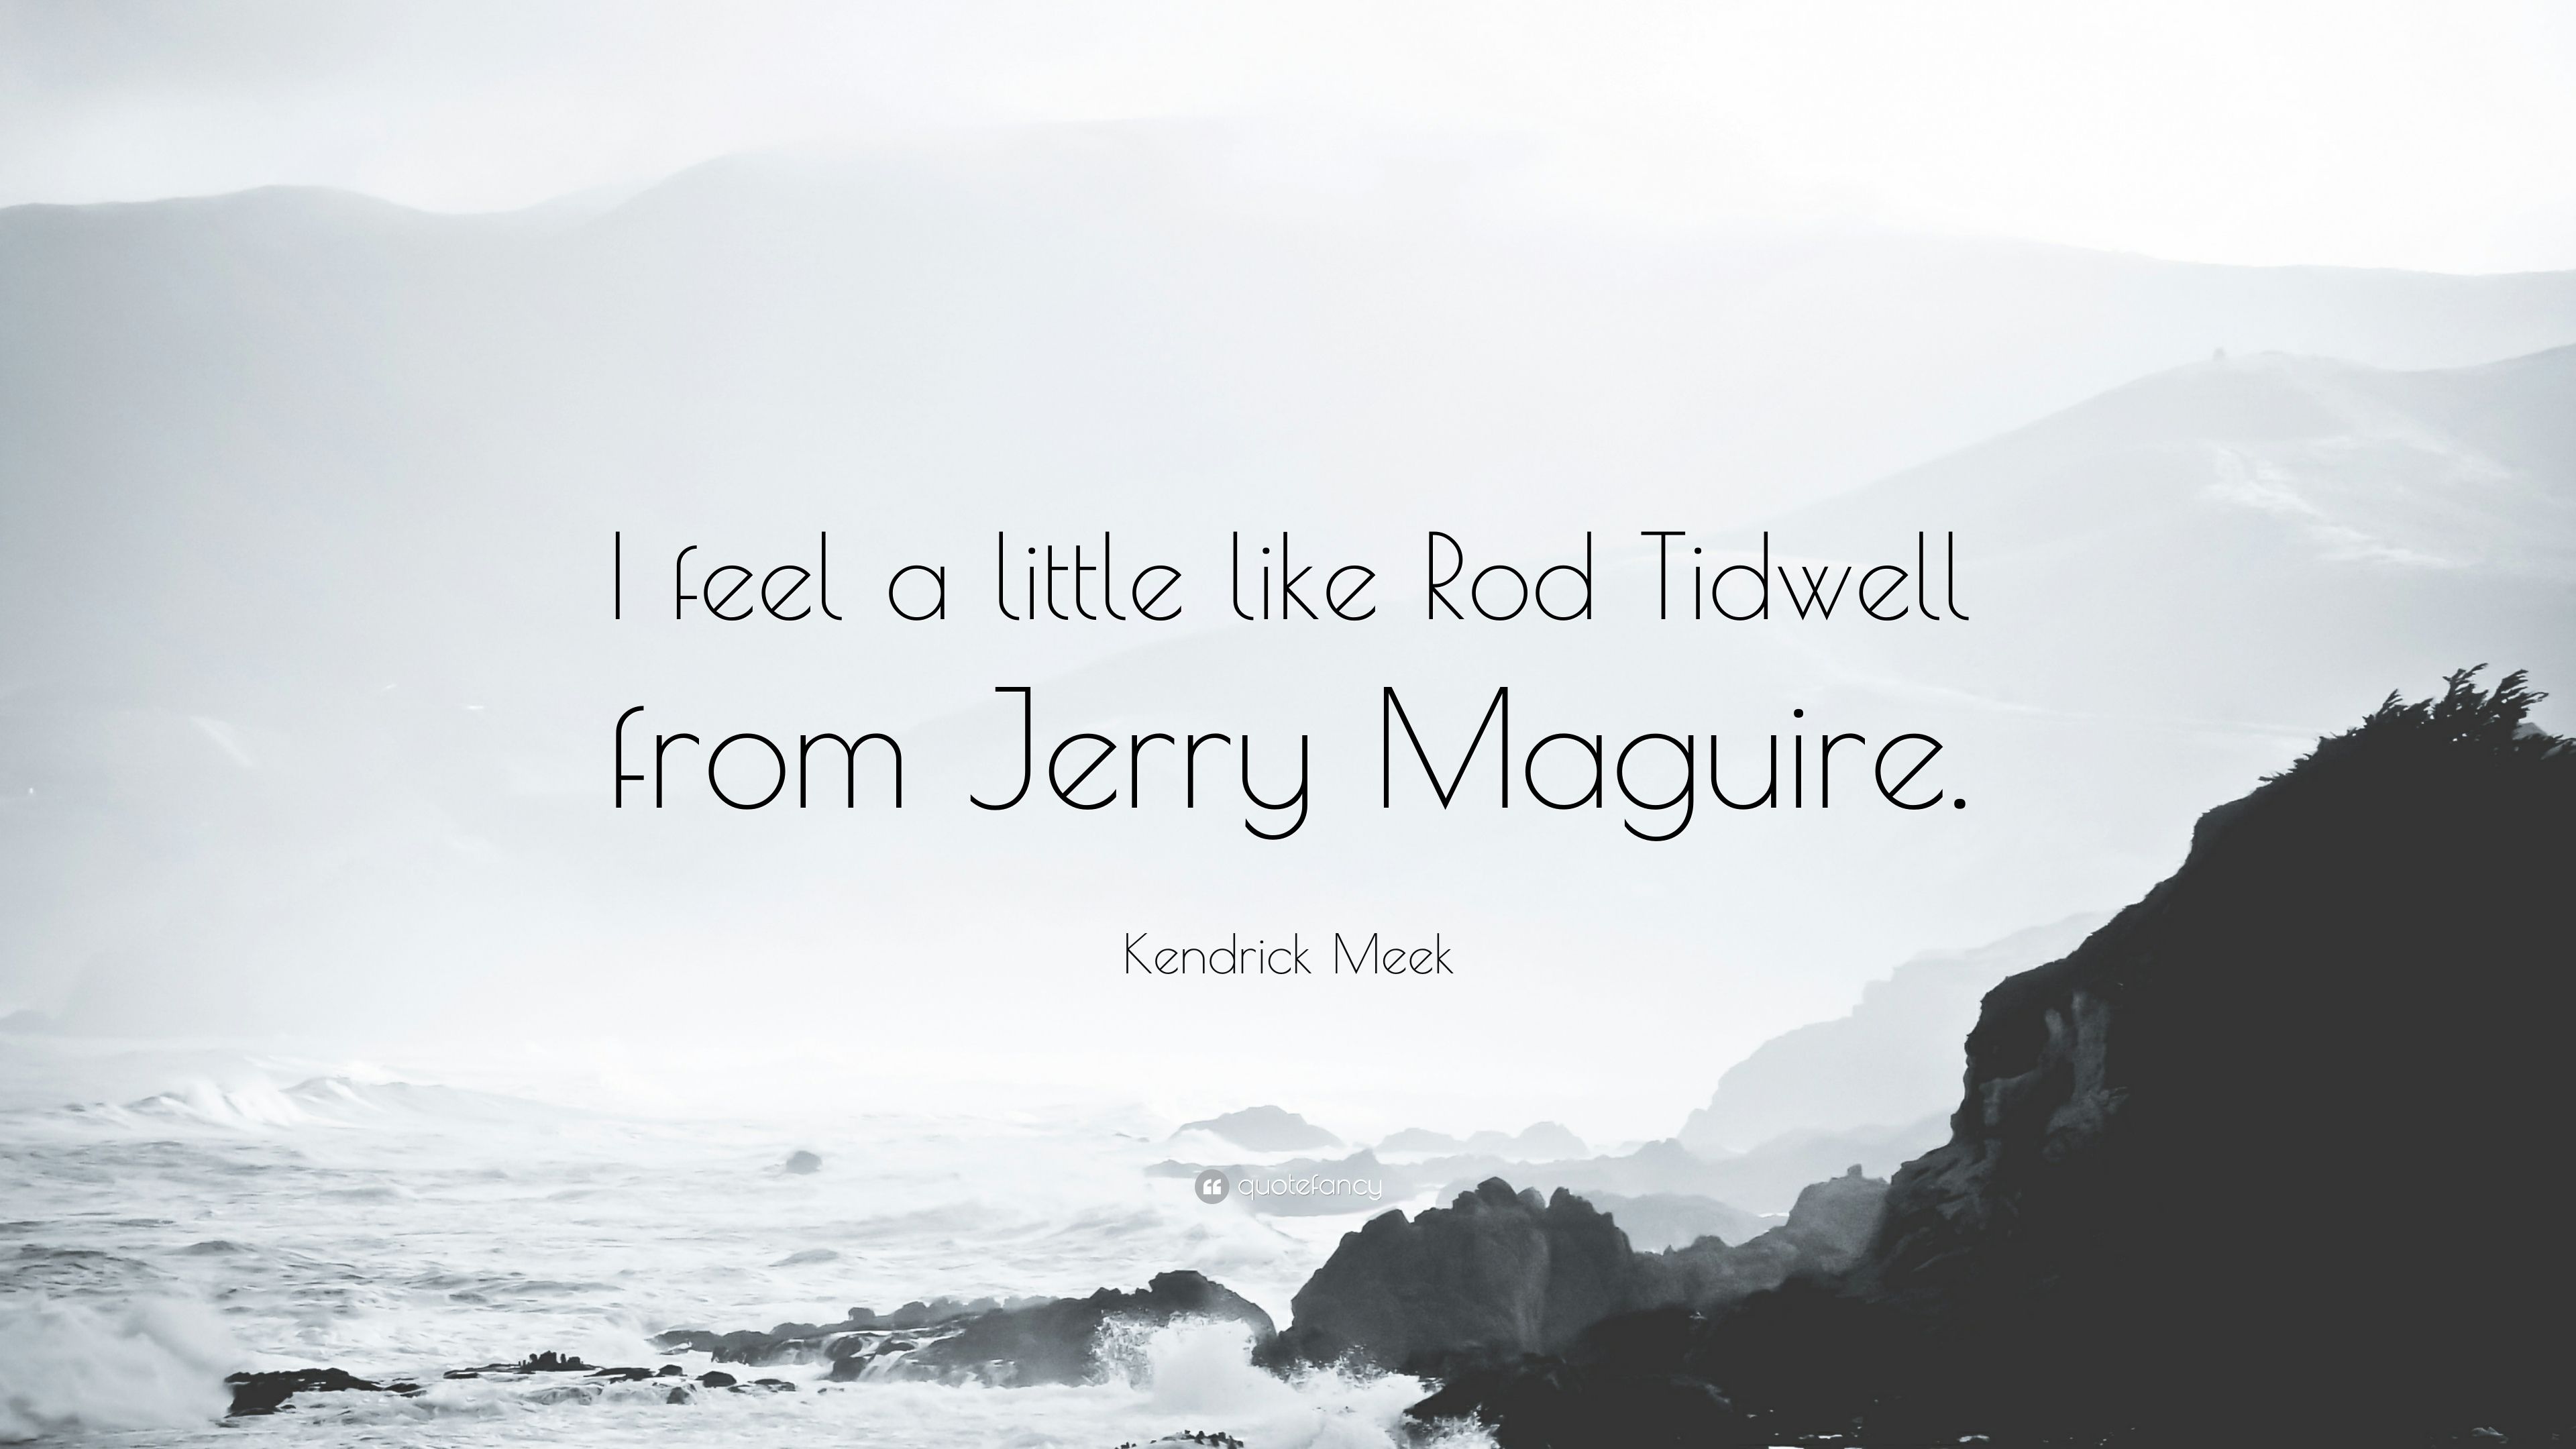 Kendrick Meek Quote: “I feel a little like Rod Tidwell from Jerry Maguire.” (7 wallpaper)